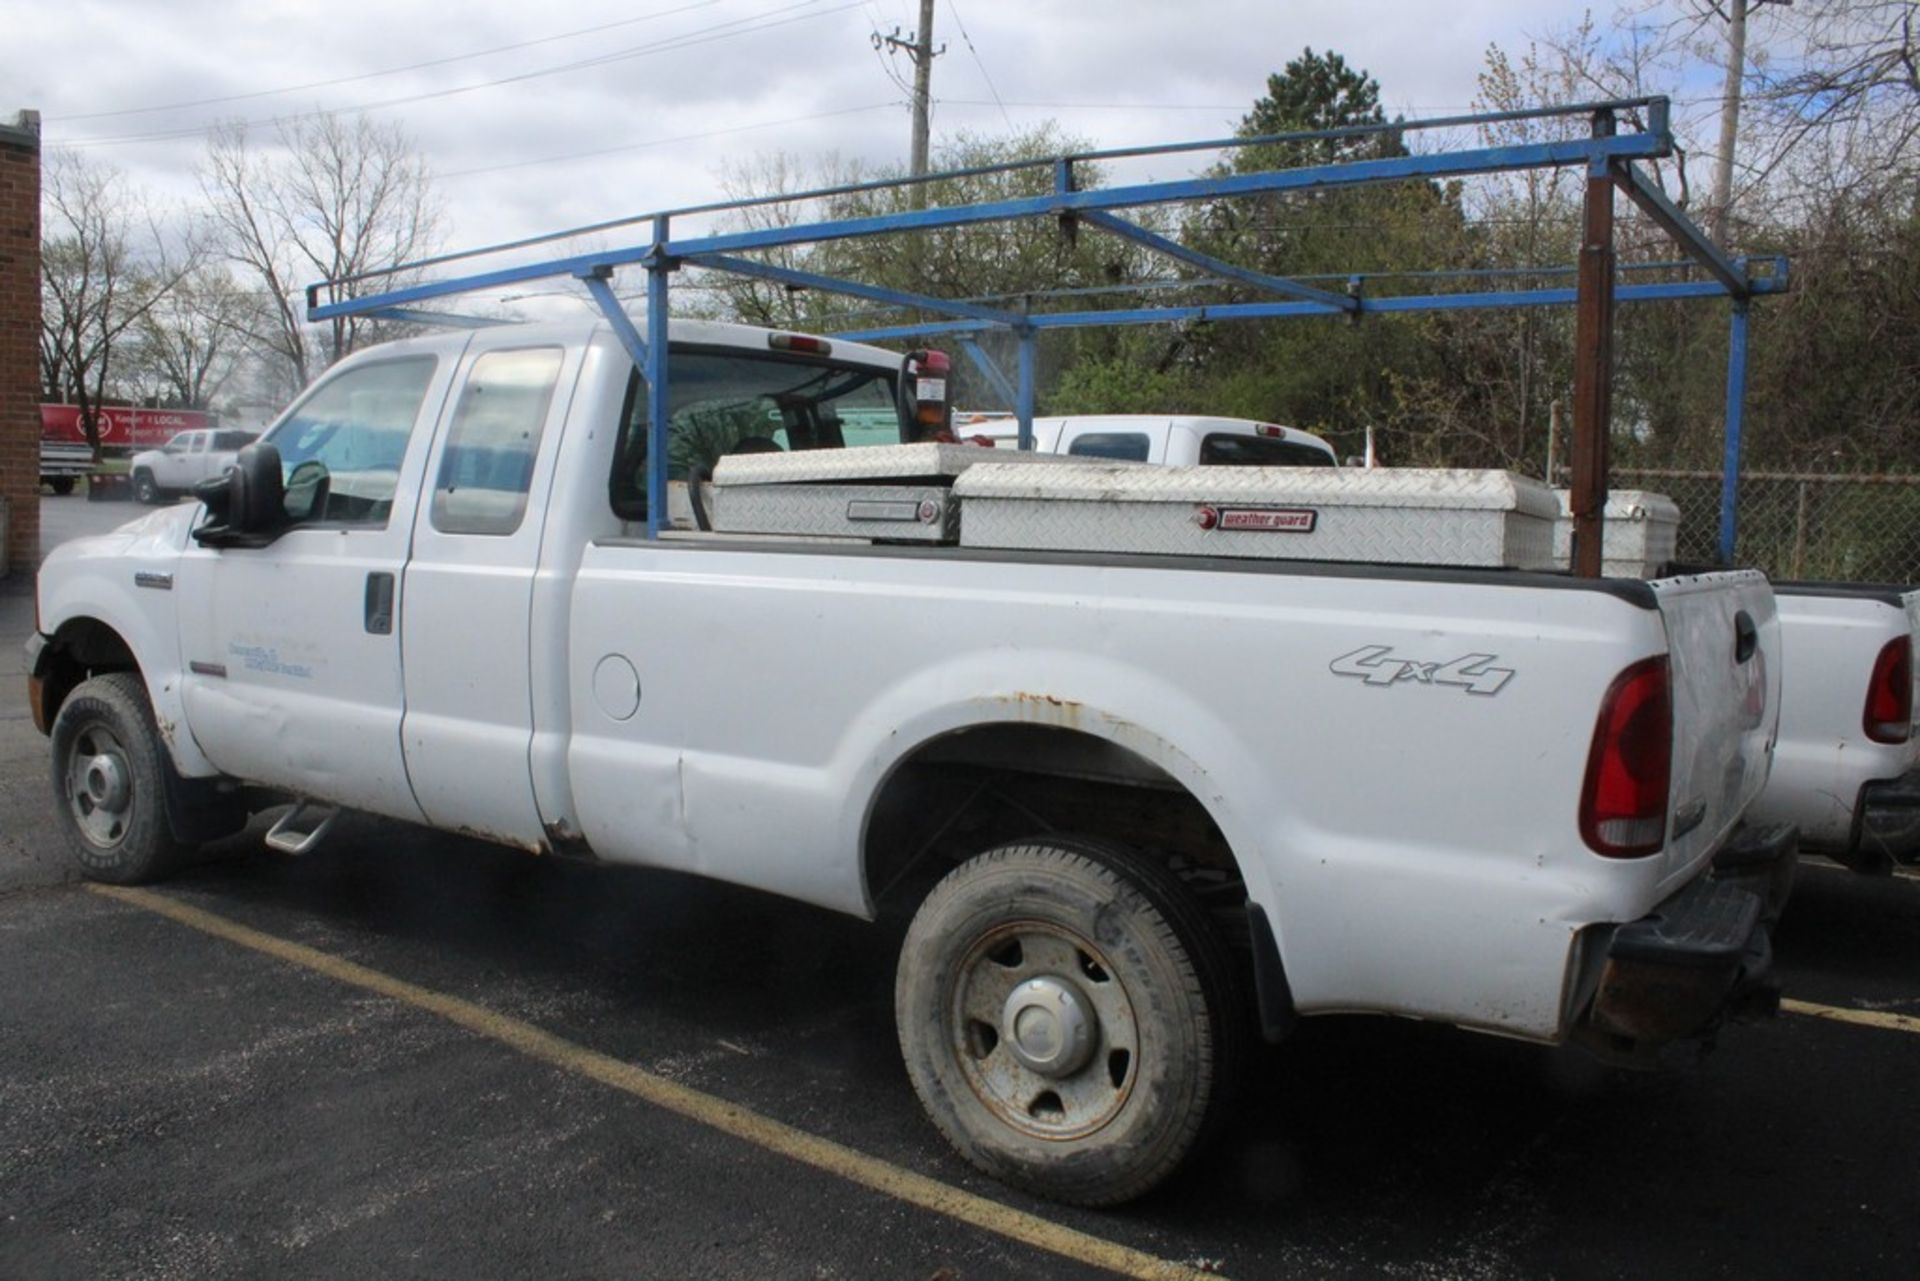 2005 FORD F-250 XL SUPER DUTY EXTENDED CAB 4 X 4 PICKUP TRUCK VIN: 1FTSX21P95EB27089 (2005) 6.0L - Image 3 of 7